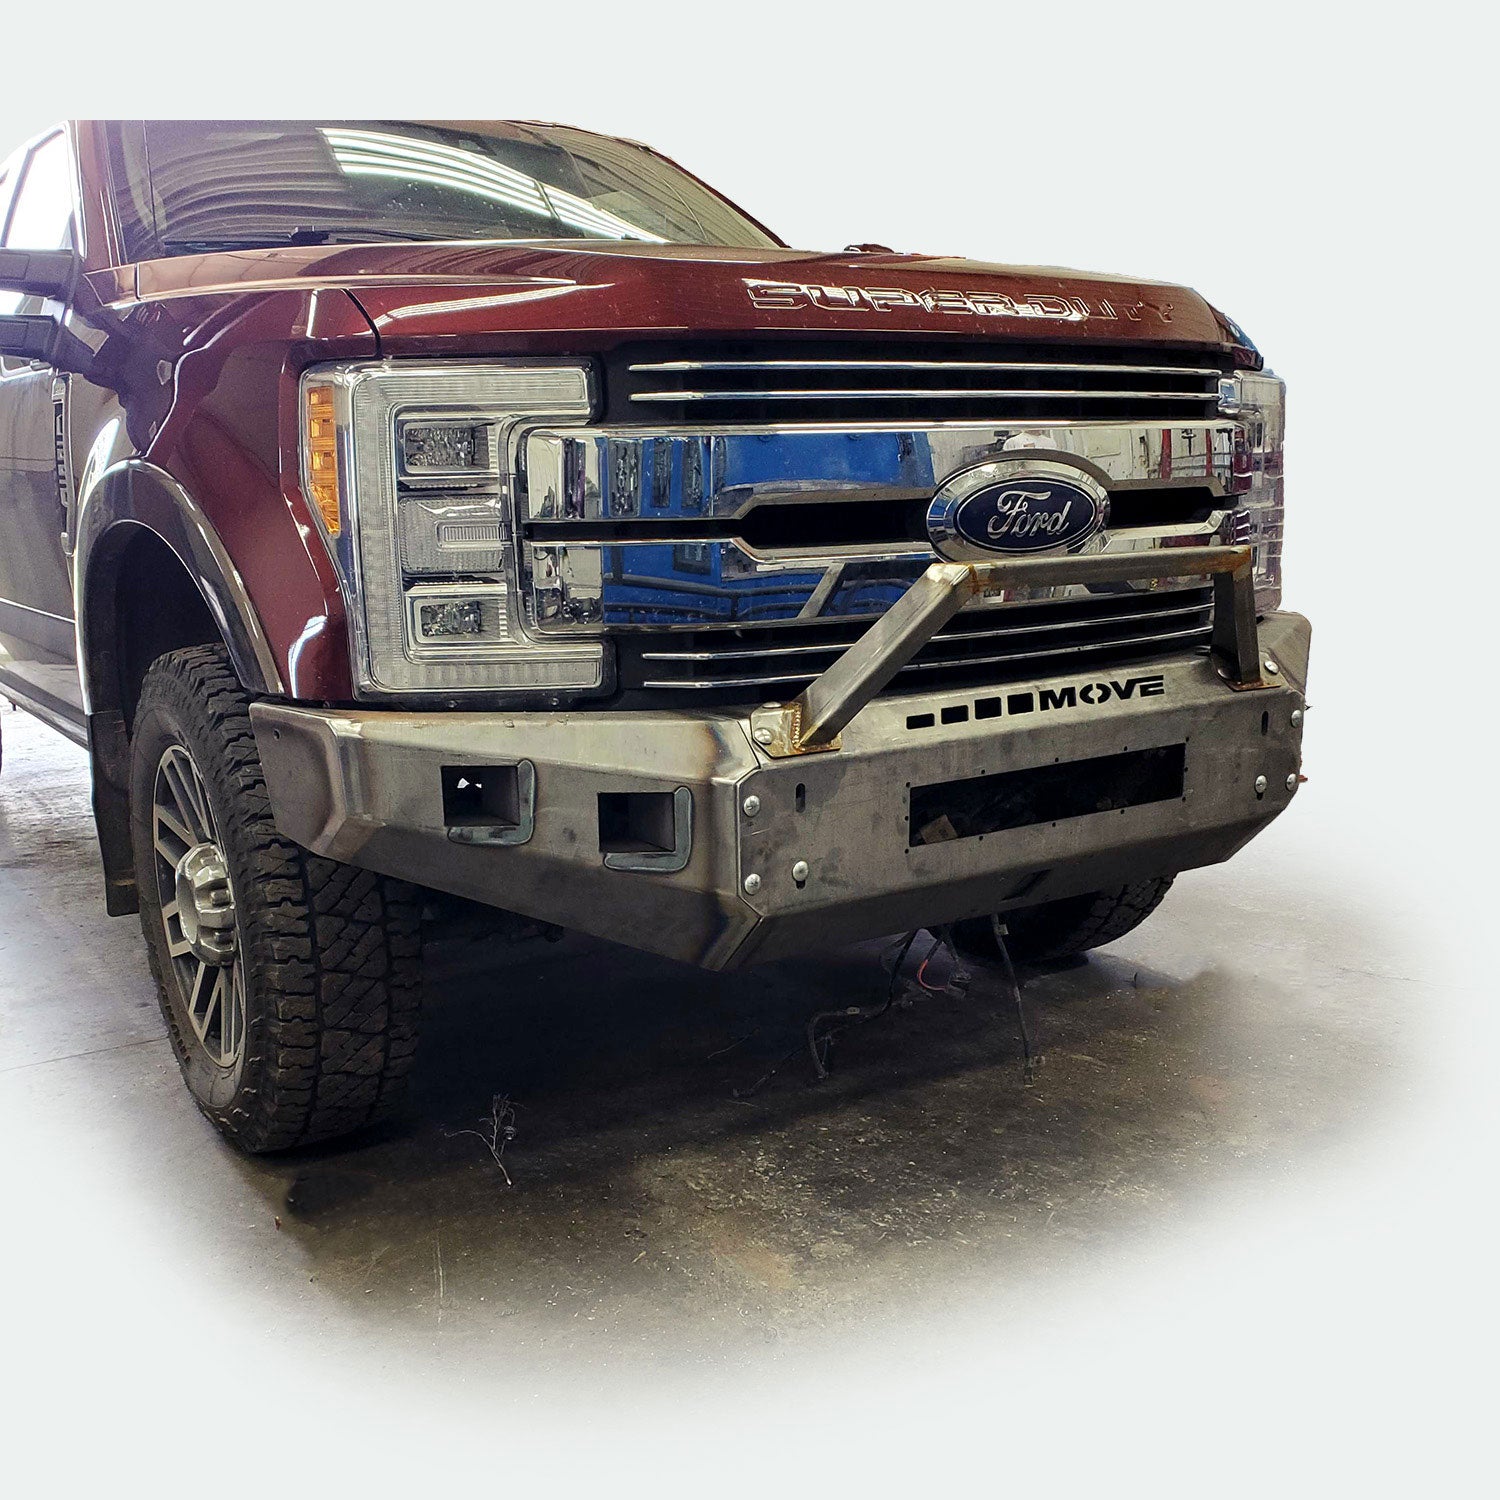 BOLT Square Force Front Bumper Kit - MOVE Bumpers